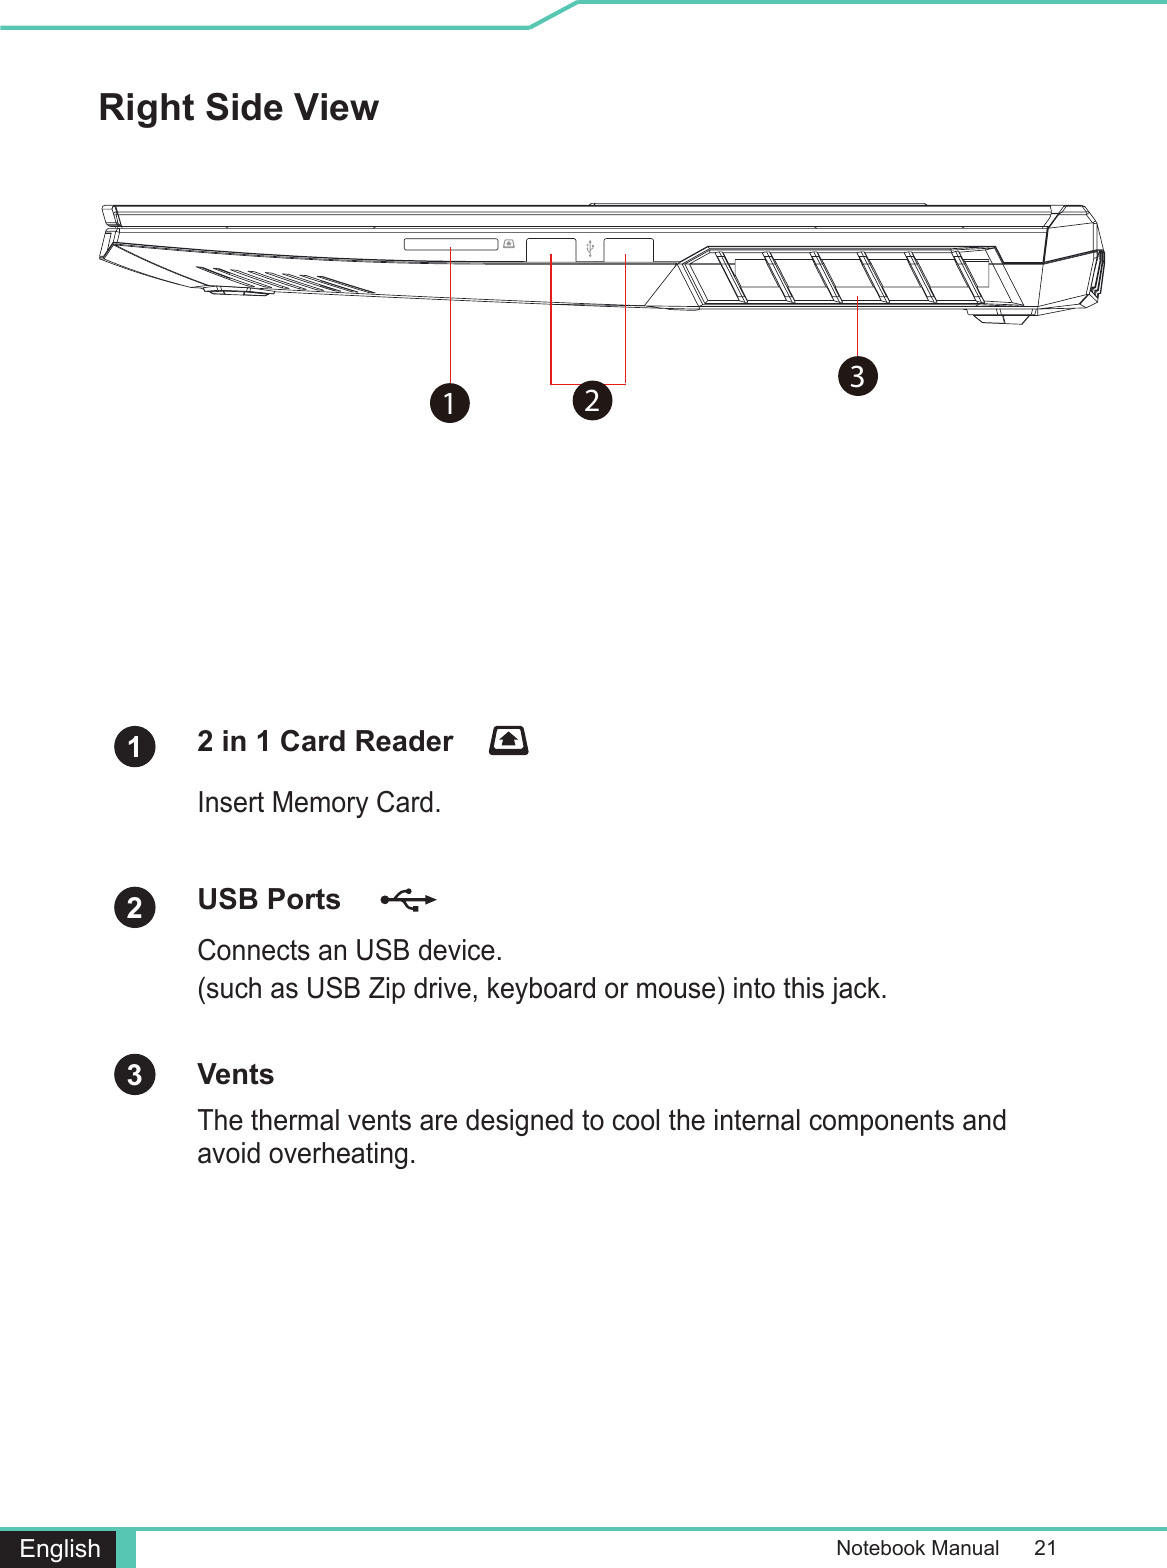 Notebook Manual      21EnglishRight Side View123USB Ports Connects an USB device. (such as USB Zip drive, keyboard or mouse) into this jack.2 in 1 Card ReaderInsert Memory Card.VentsThe thermal vents are designed to cool the internal components and avoid overheating.123